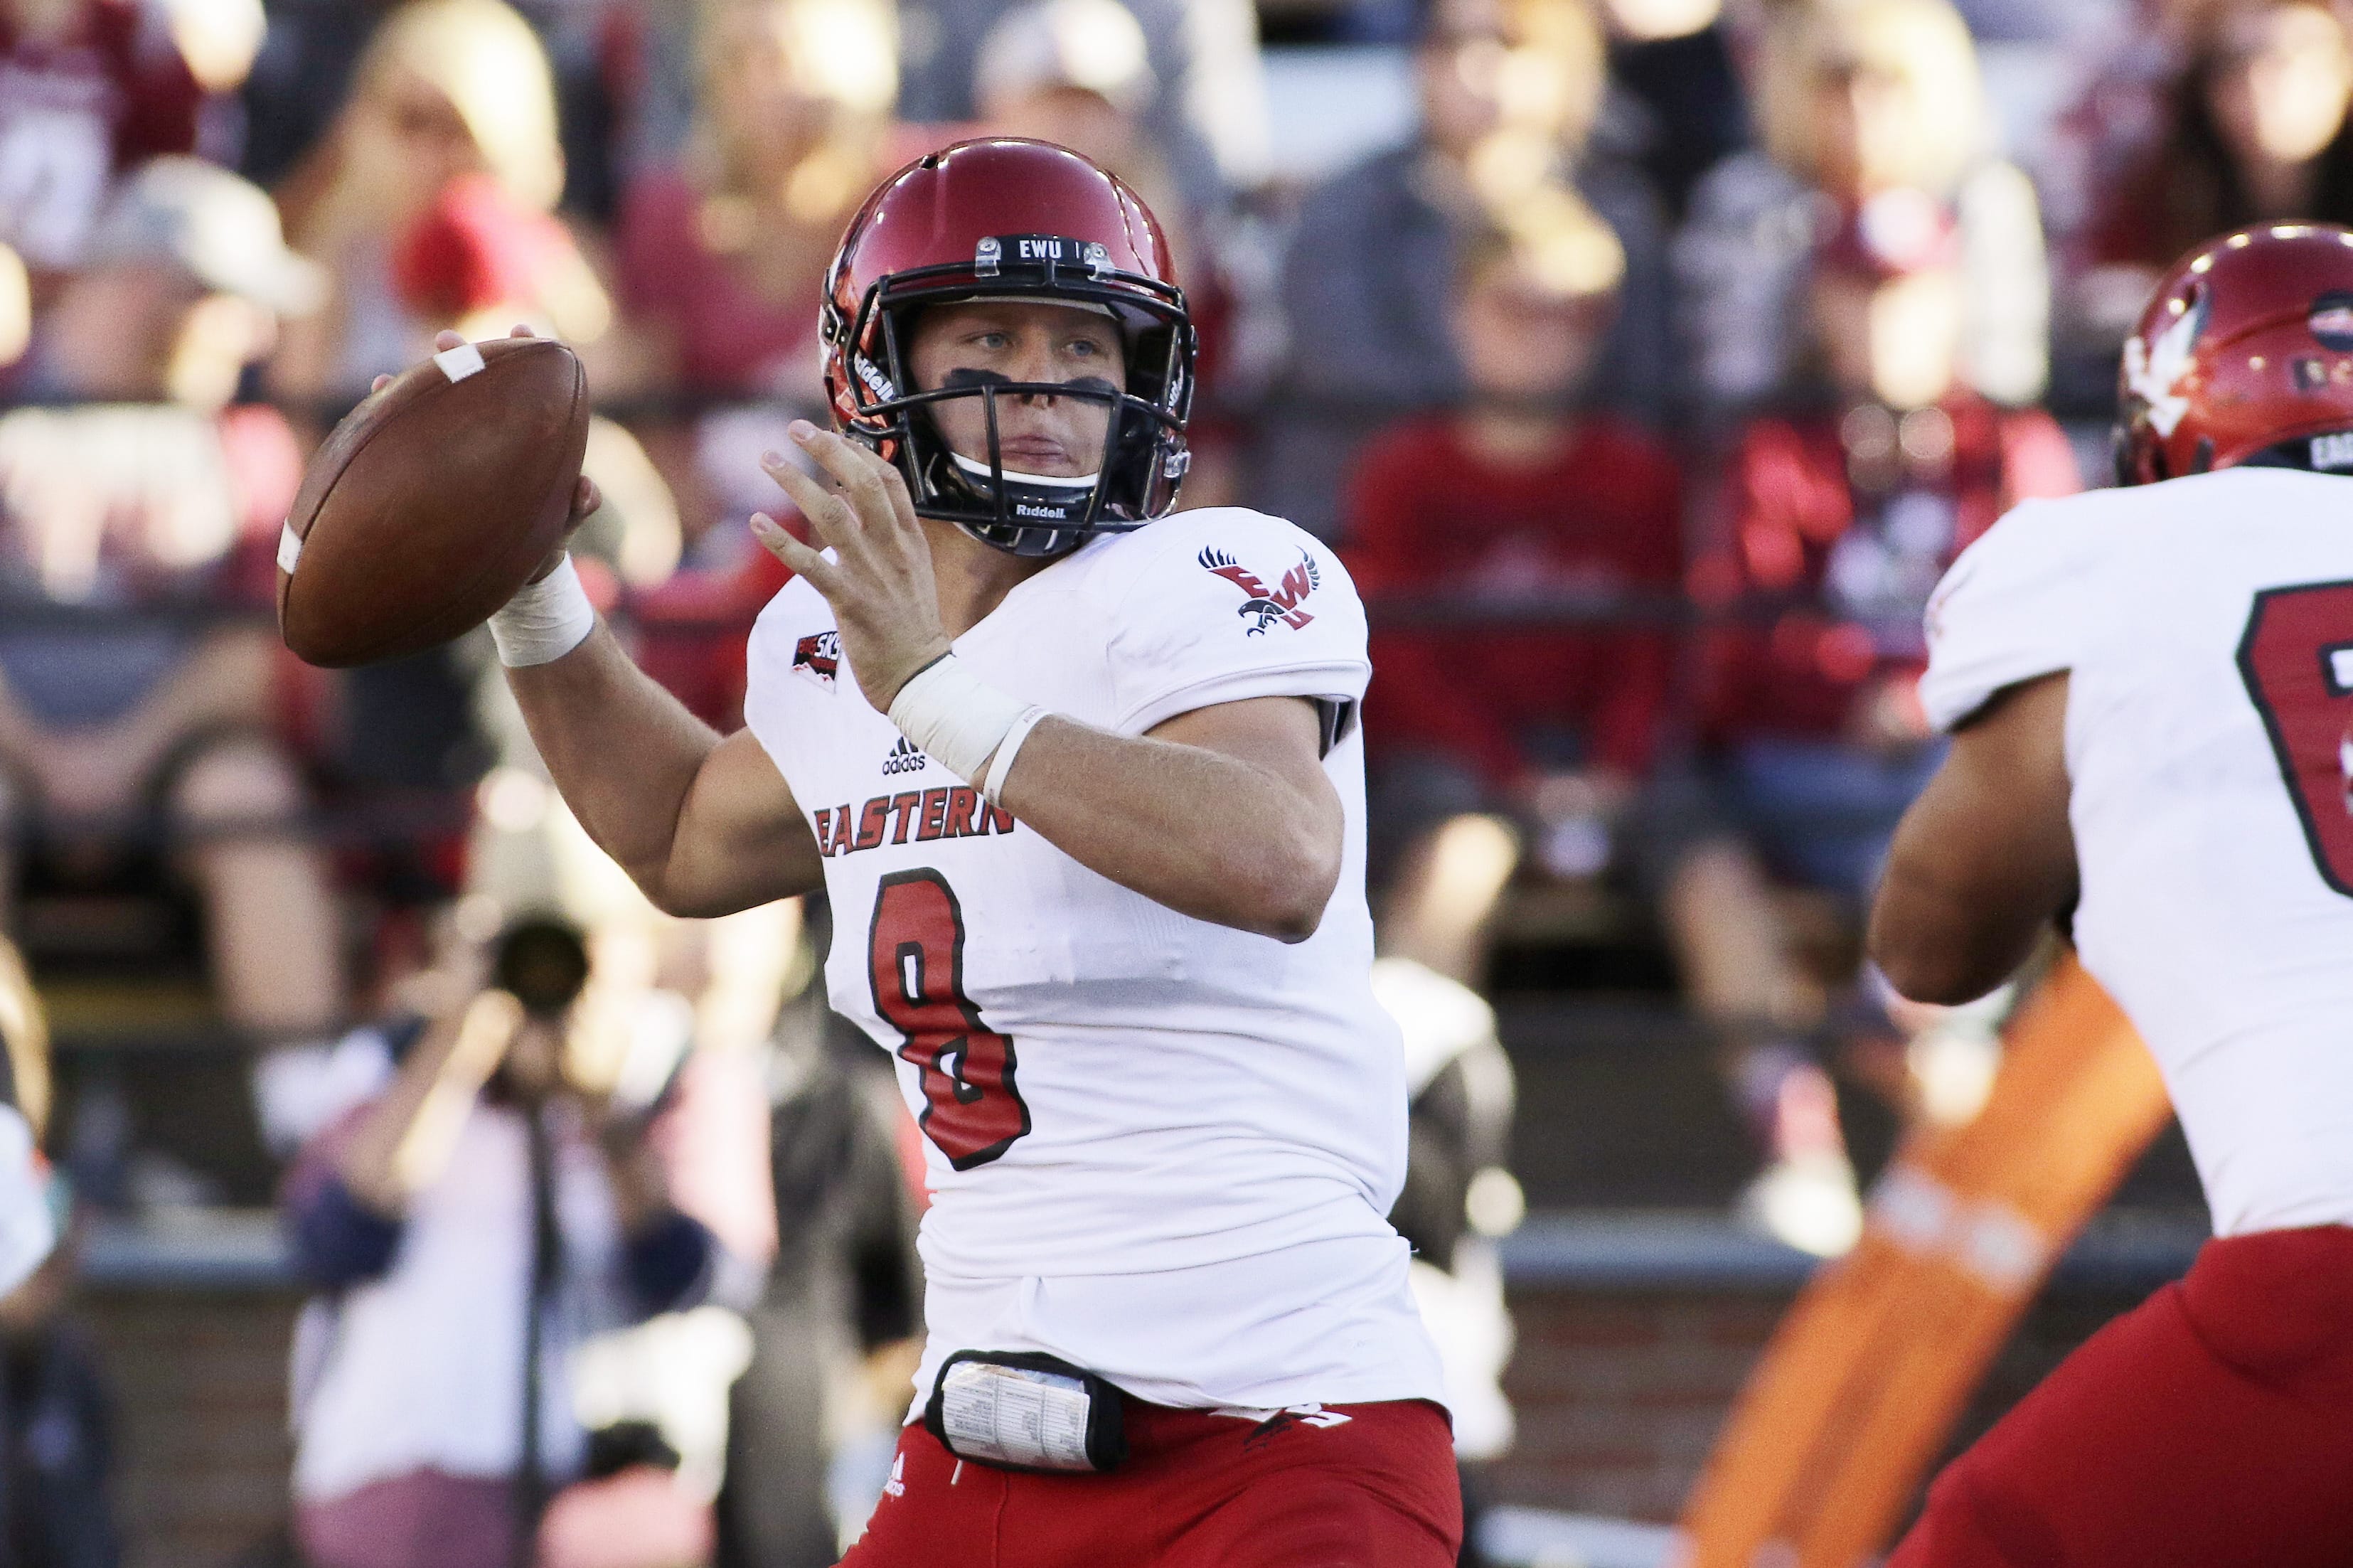 Eastern Washington quarterback Gage Gubrud (8) looks to pass during the first half of an NCAA college football game against the Washington State in Pullman, Wash., Saturday, Sept. 3, 2016.